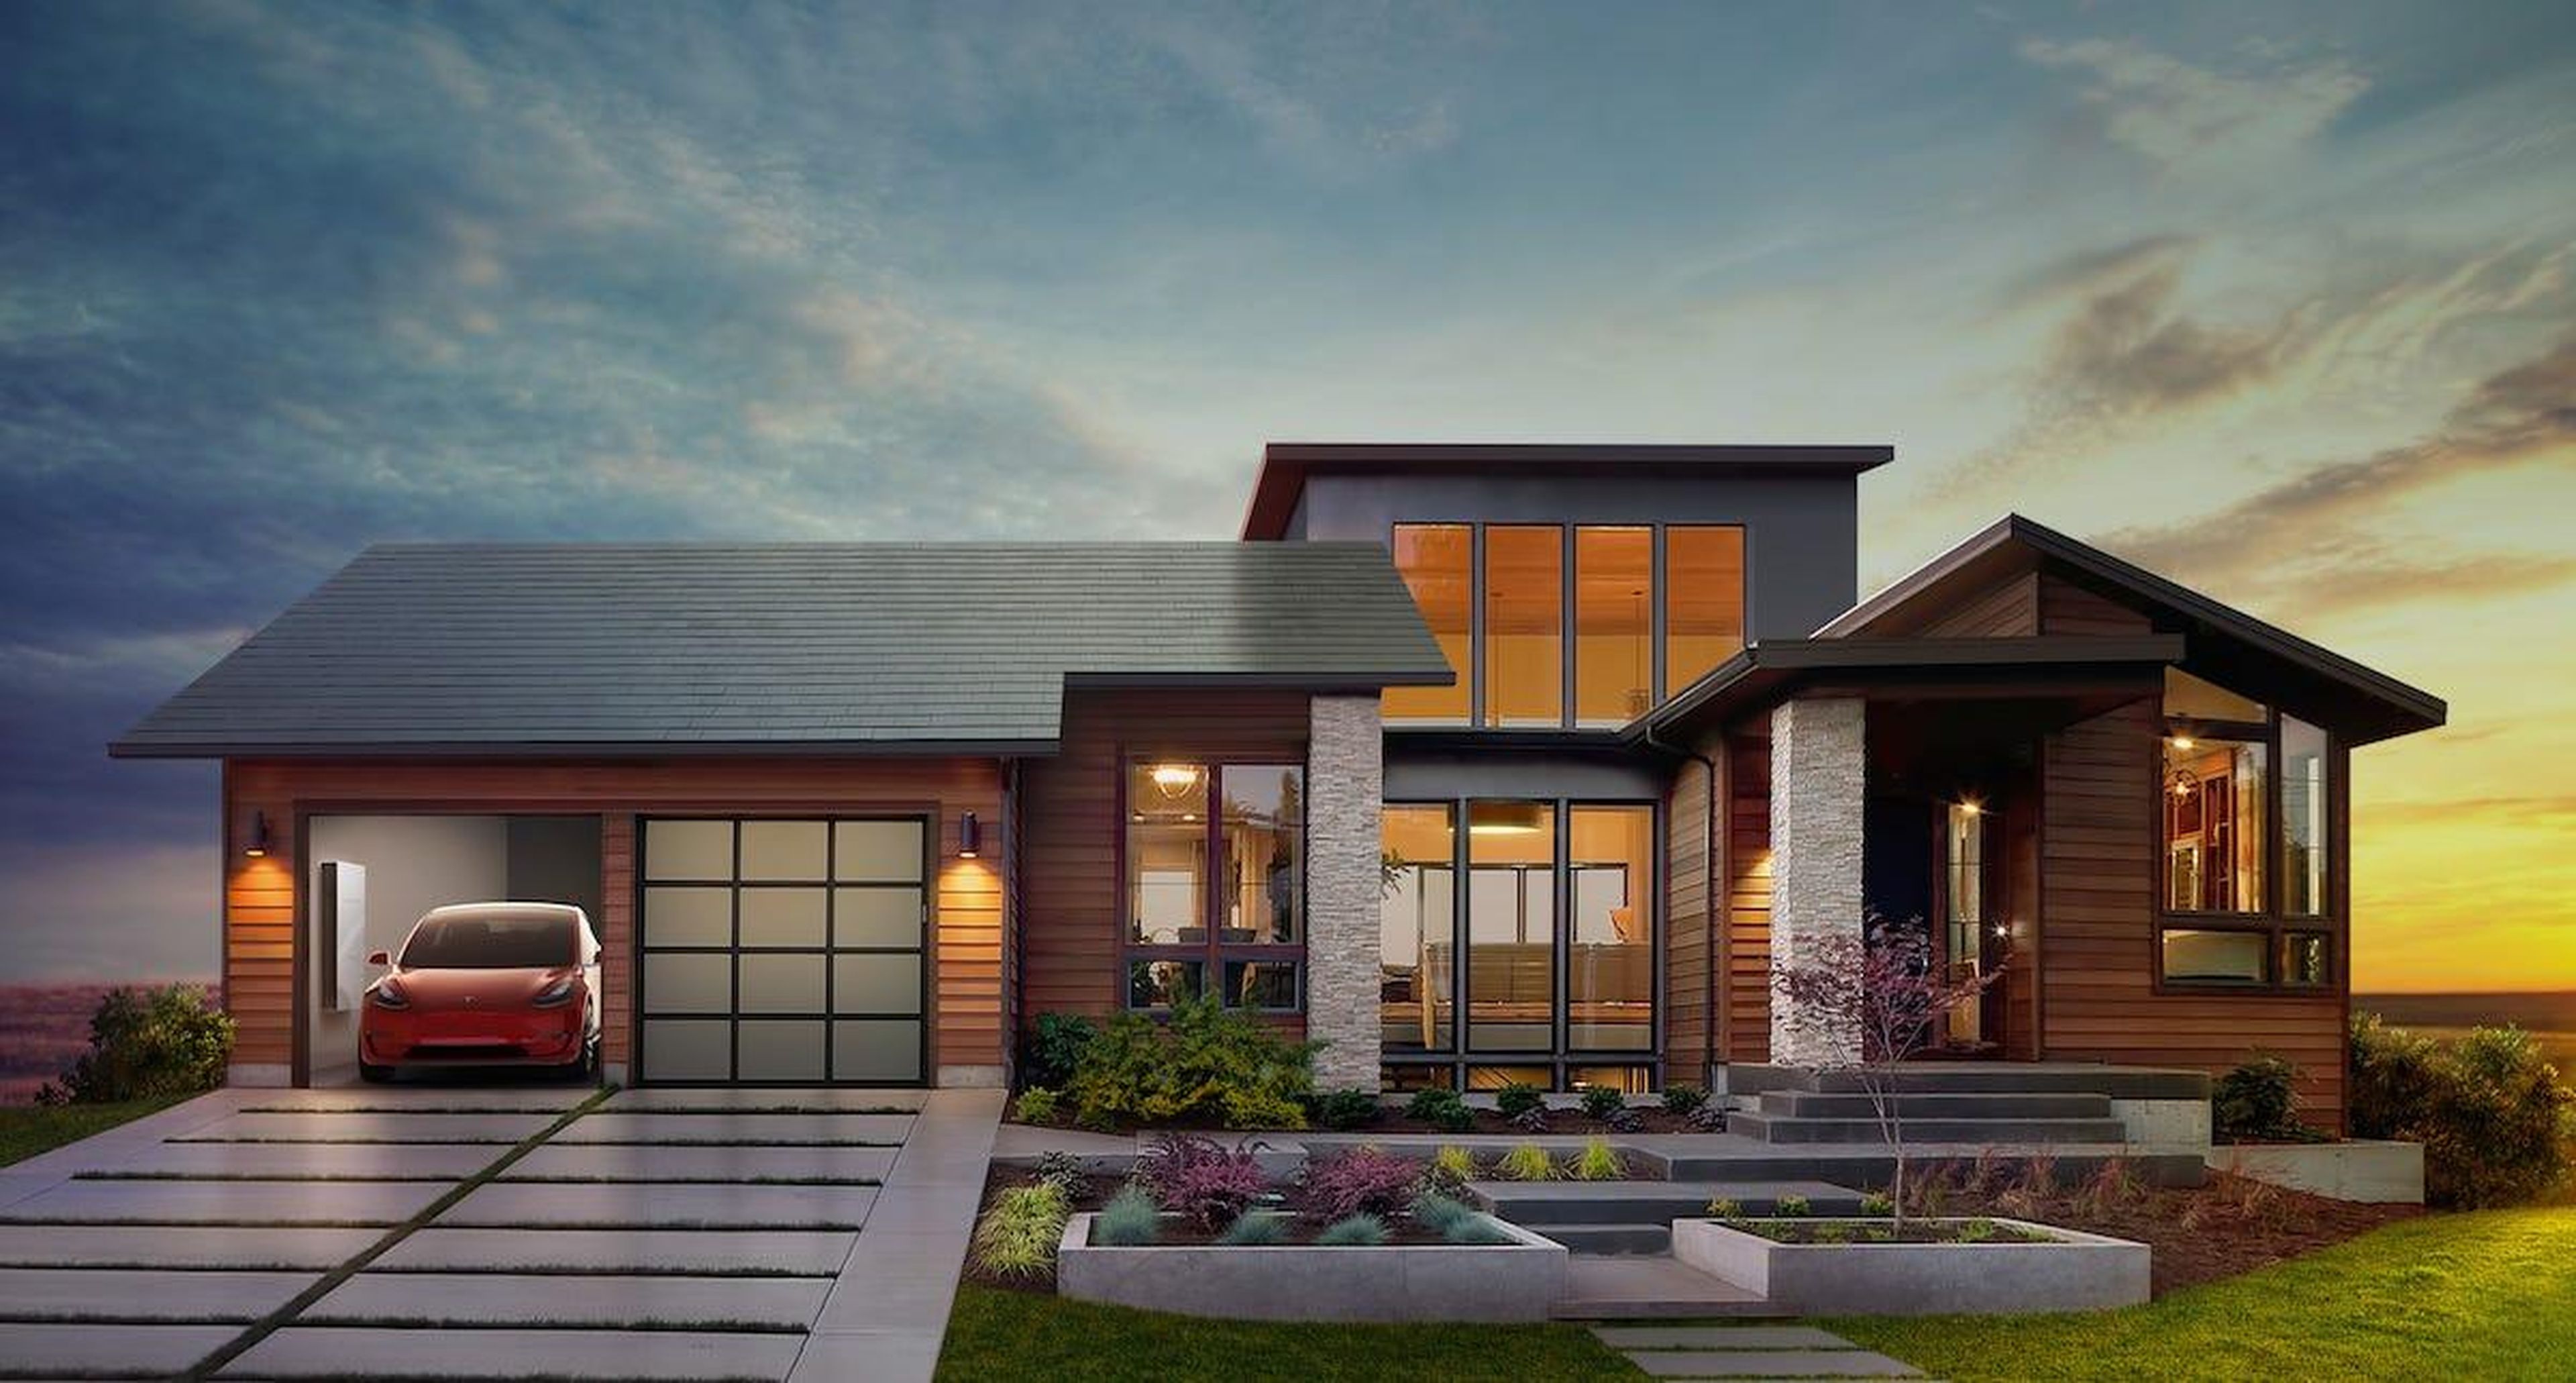 ... And after it acquired SolarCity in 2016, integrated solar residential rooftops.